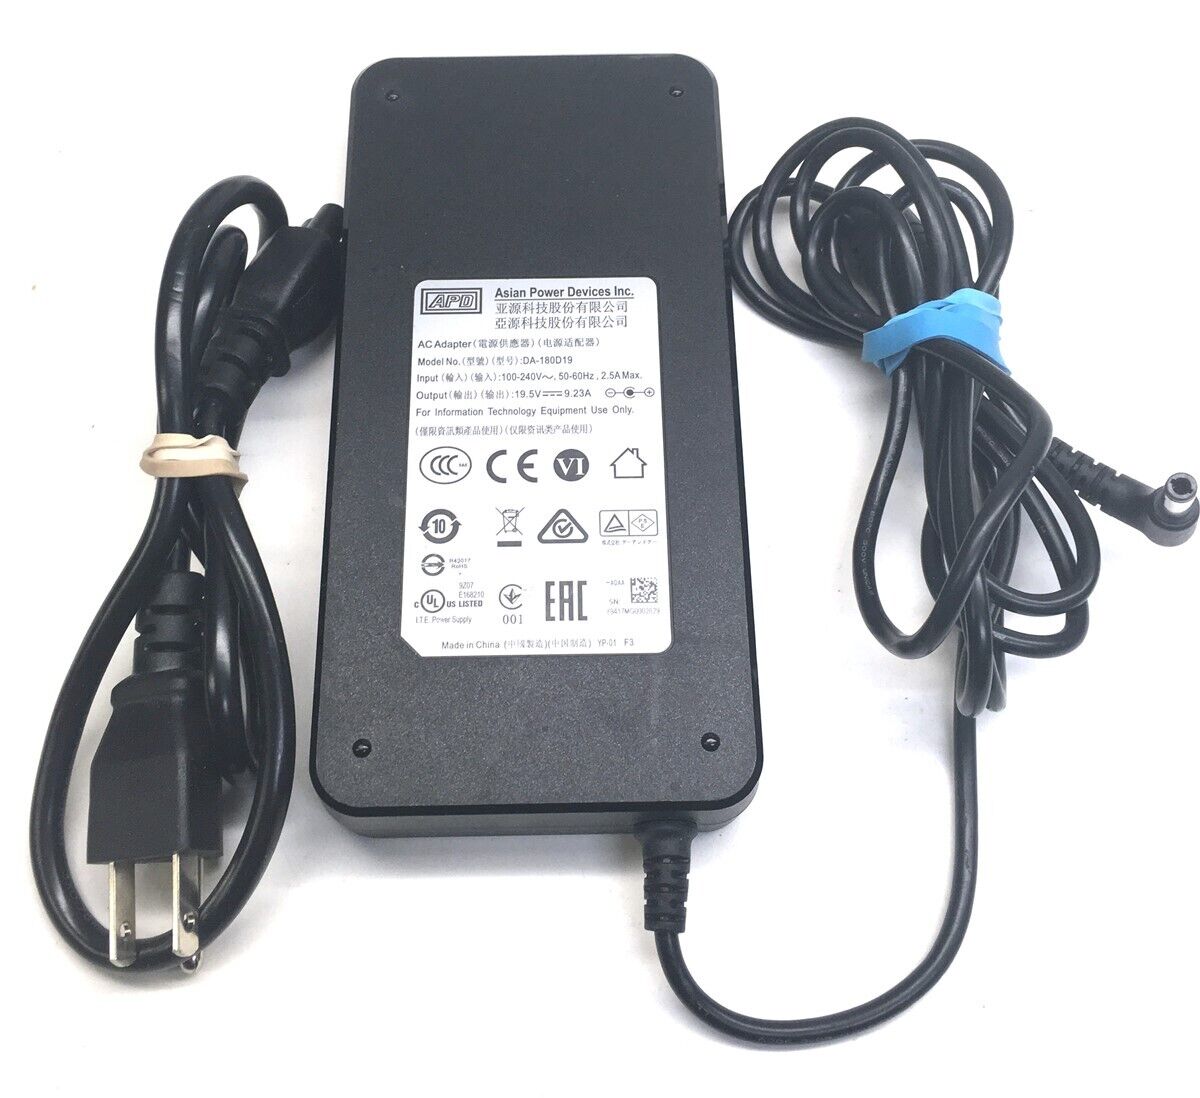 APD AC Adapter Power Supply for Clevo Sager Laptop DA-180D19 19.5V 9.23A 180W Brand: ApD Type: Power Supply Compatib